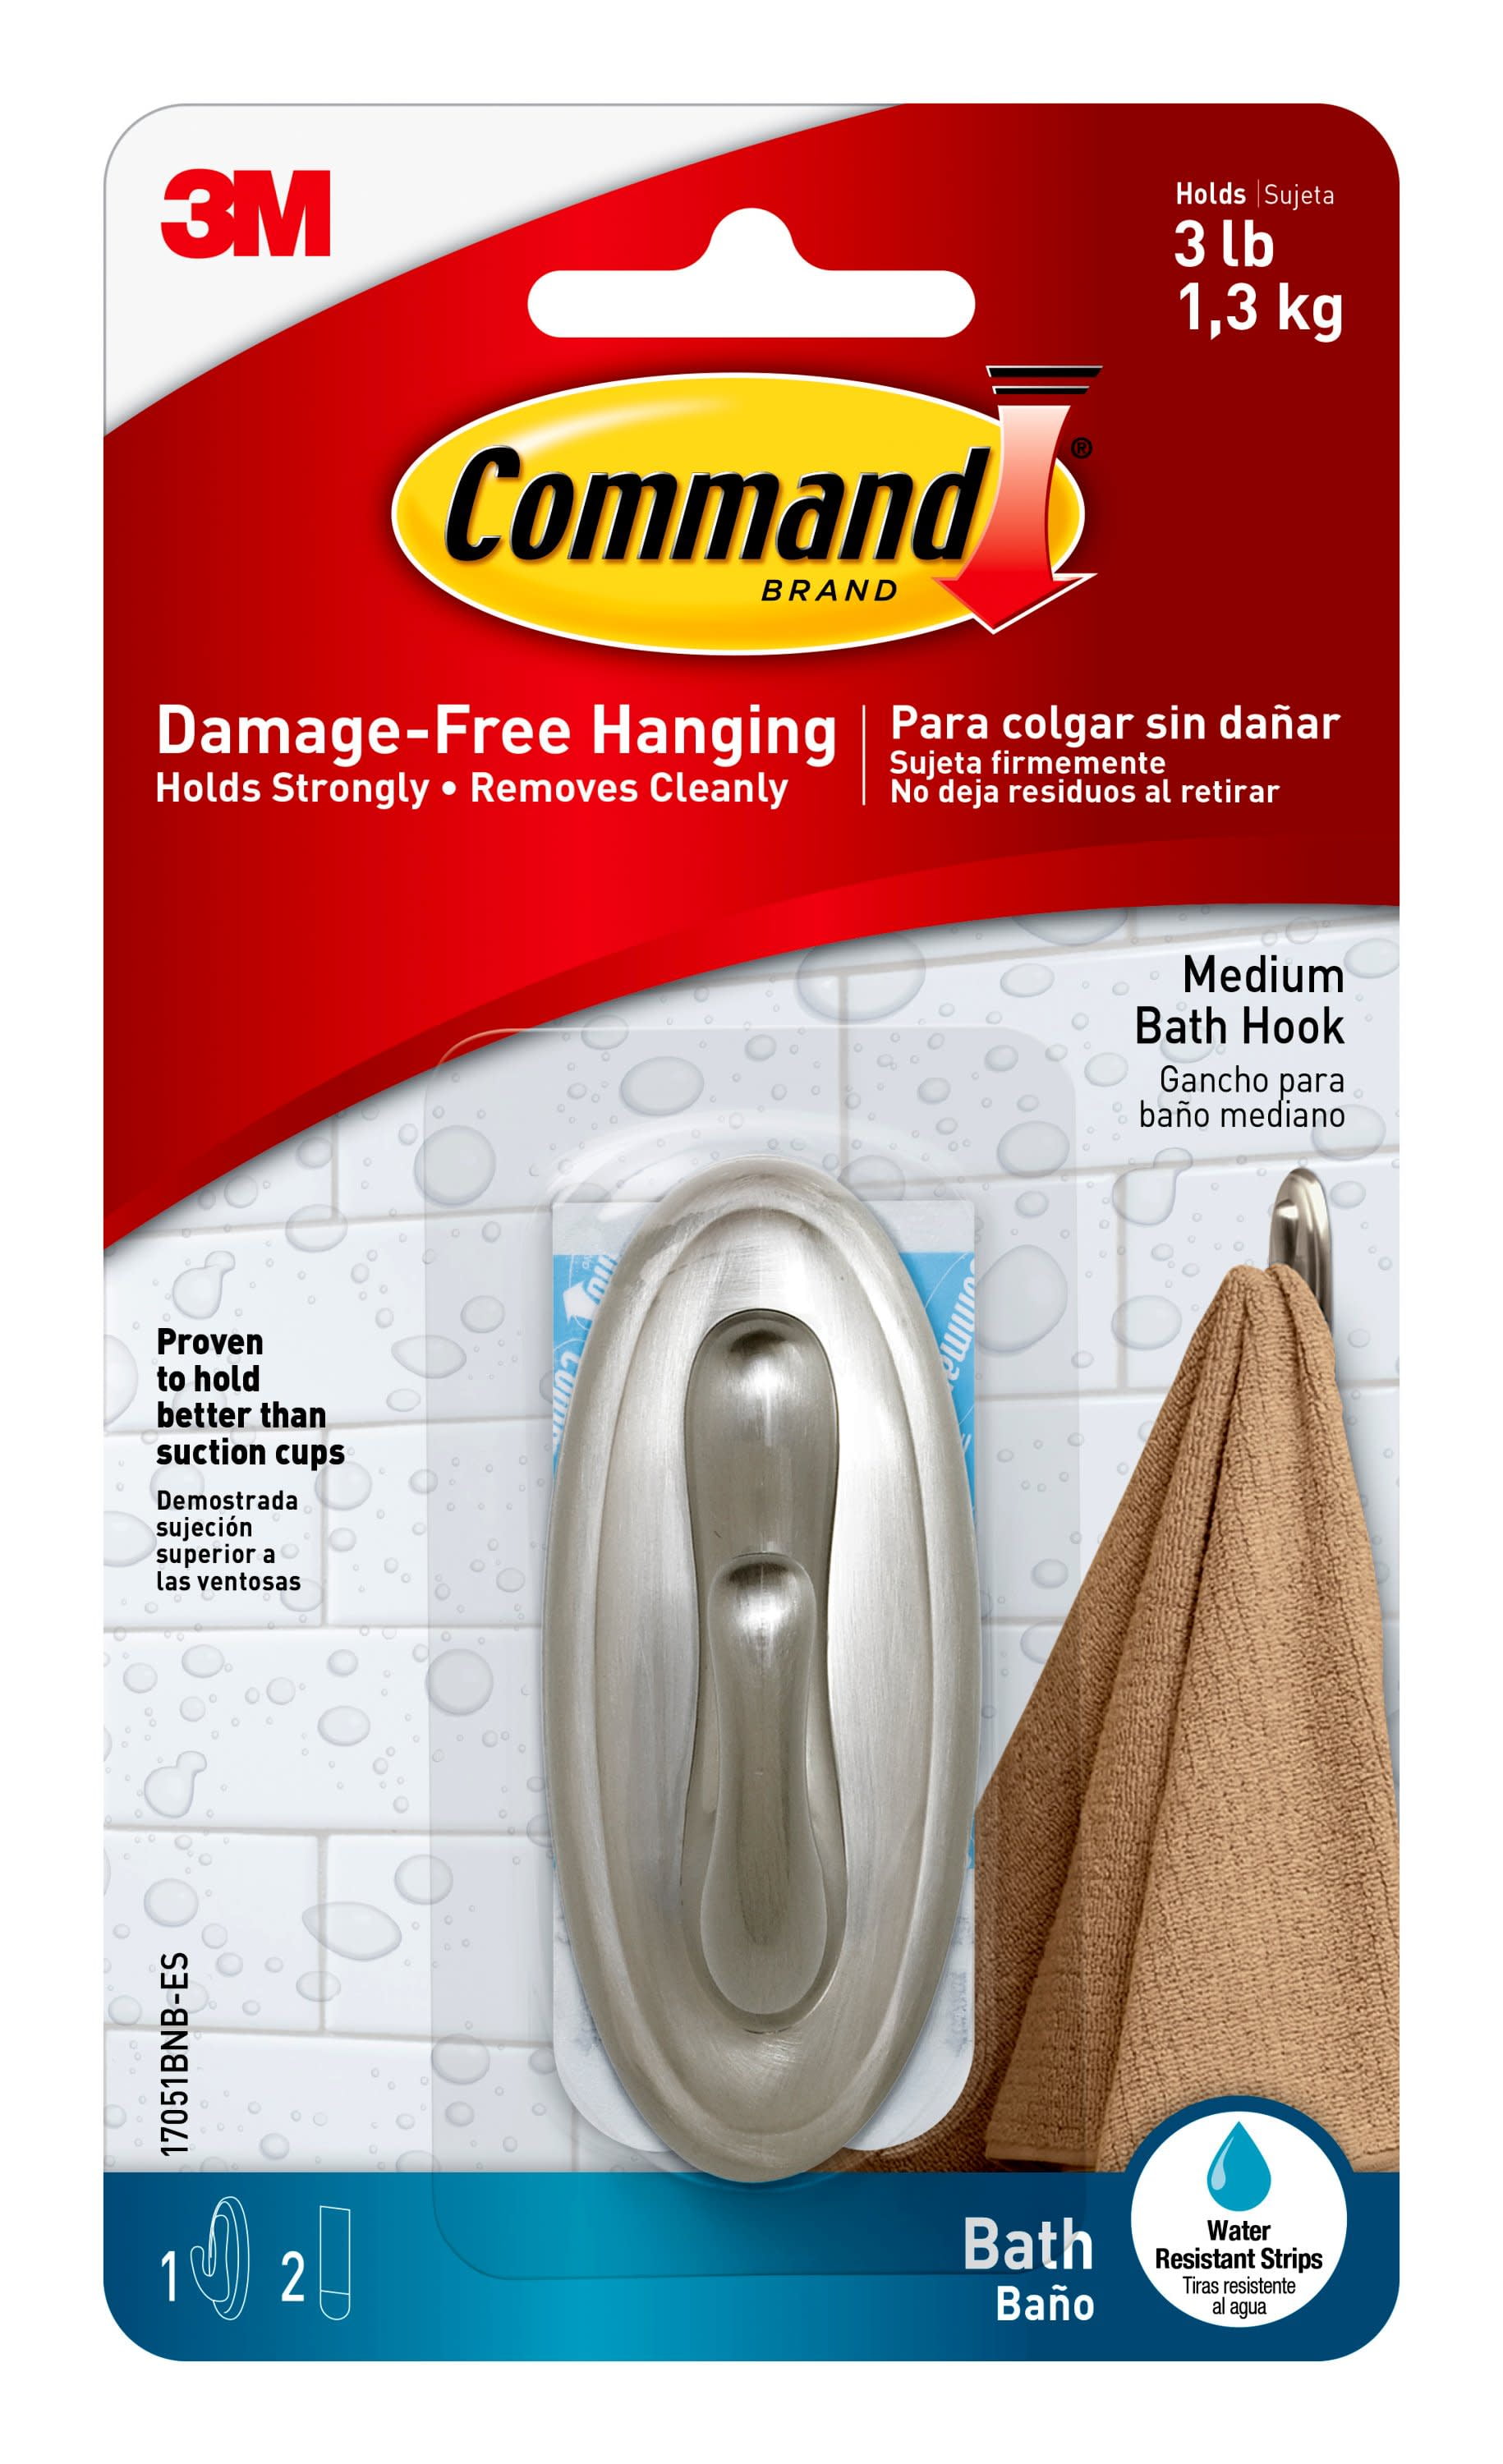 Command 3M Strips Hook with Brushed Nickel Finish, 1 hook